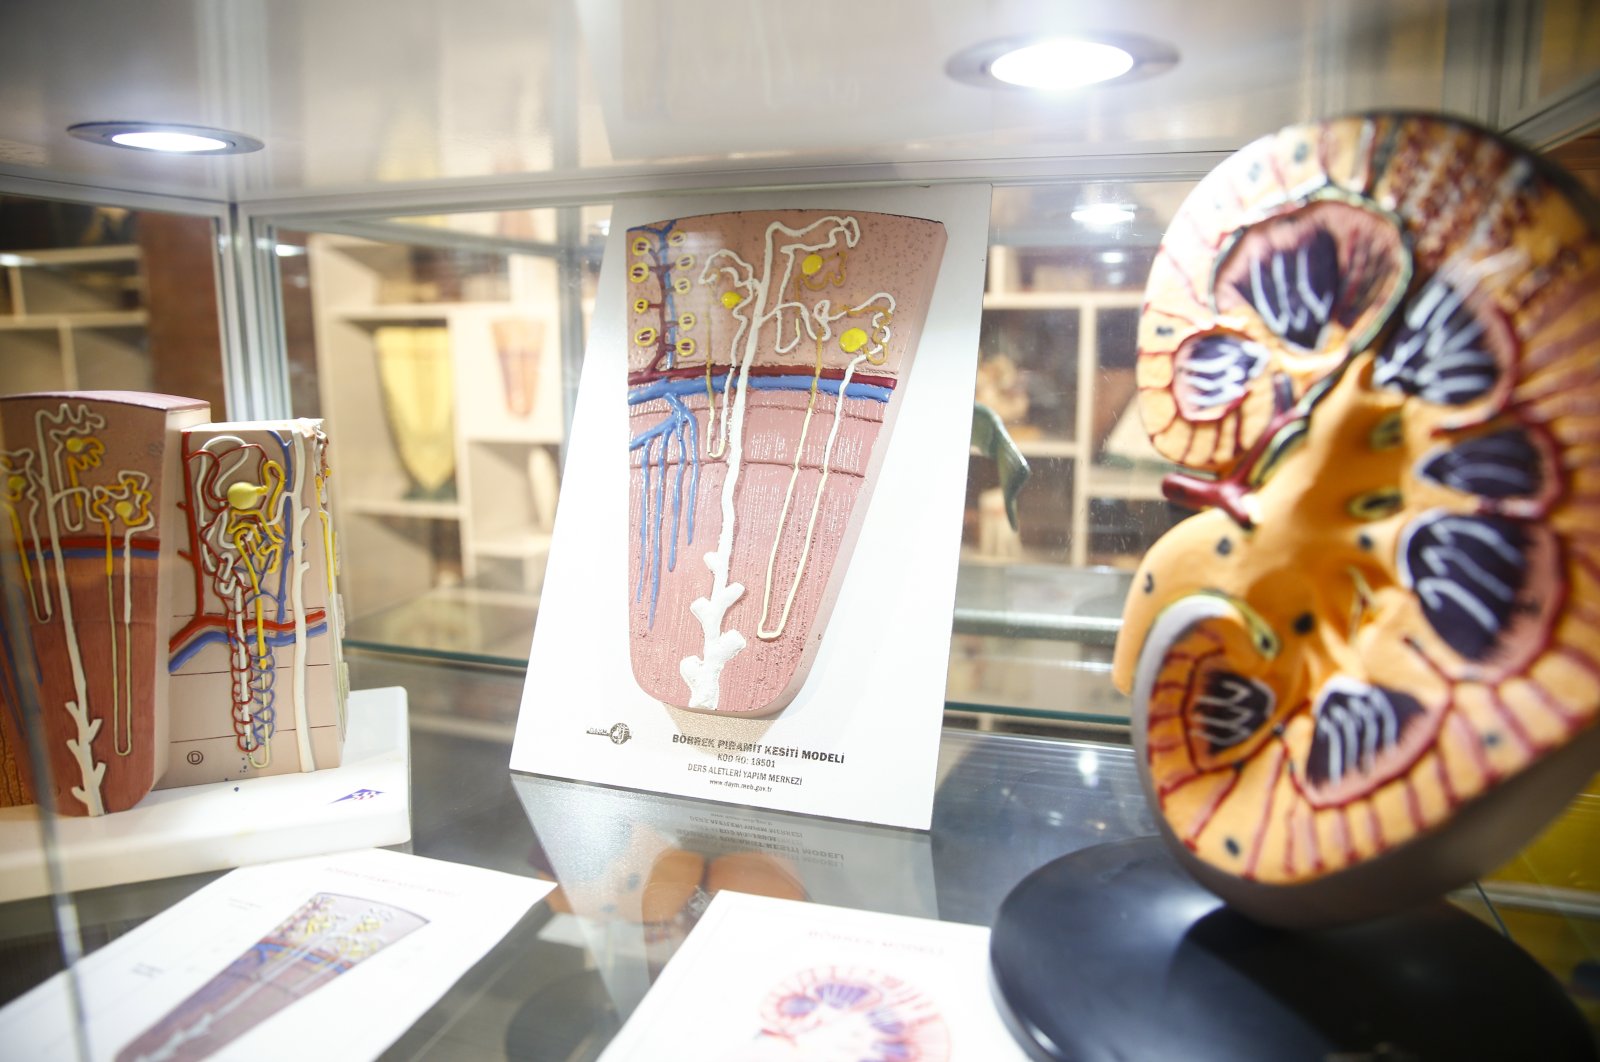 Course materials illustrating the human kidney are displayed in the museum, Ankara, Turkey, June 1, 2022. (AA Photo)